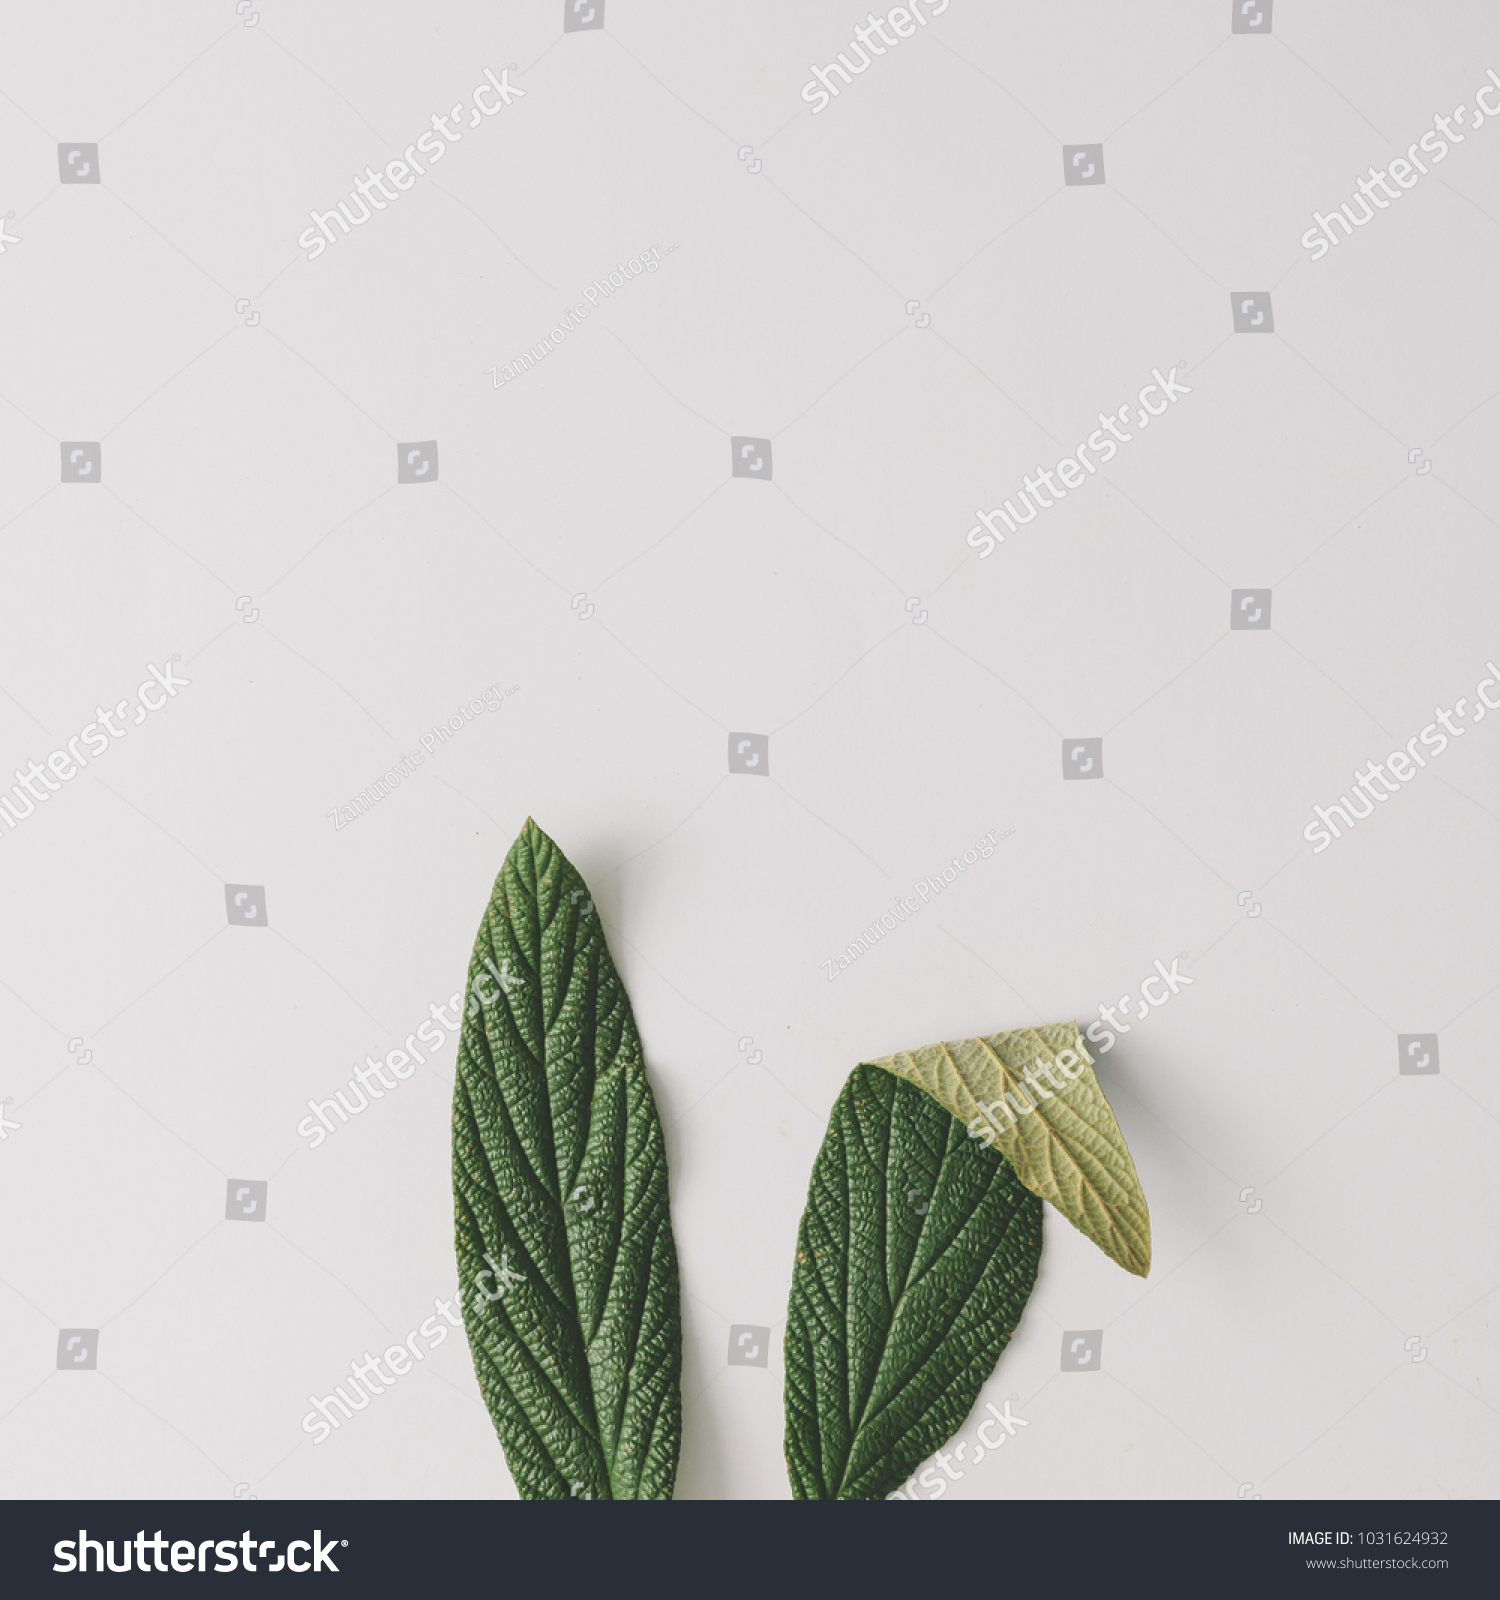 Bunny rabbit ears made of natural green leaves on bright background. Easter minimal concept. Flat lay. #1031624932